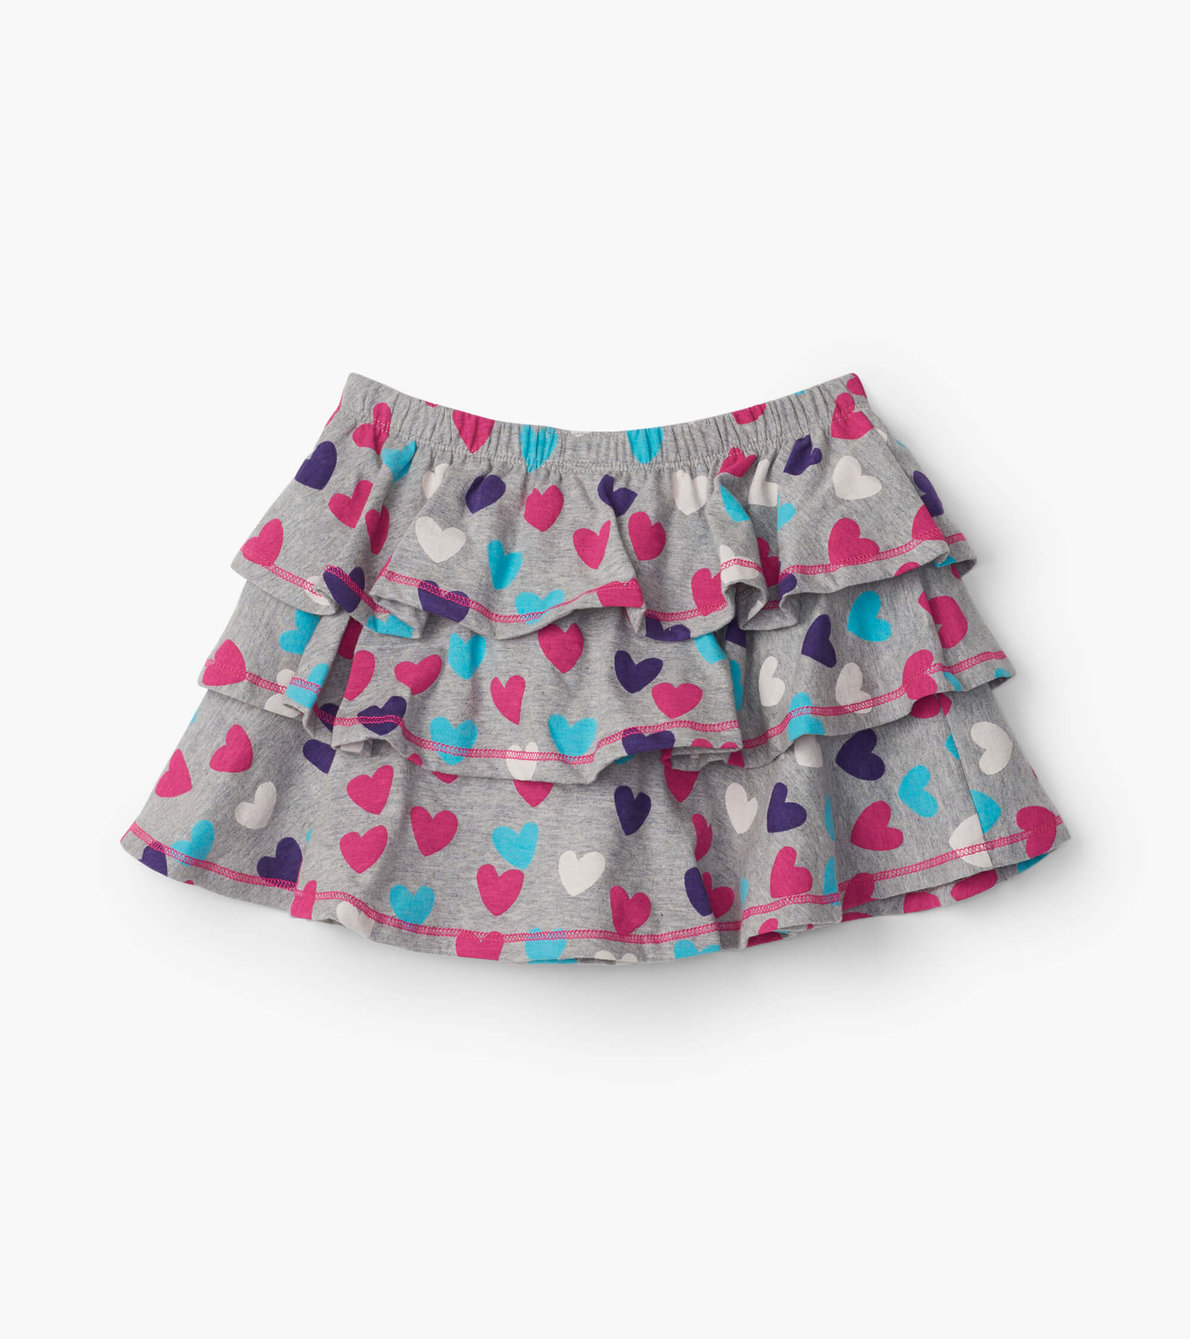 View larger image of Multicolour Hearts Ruffle Skirt